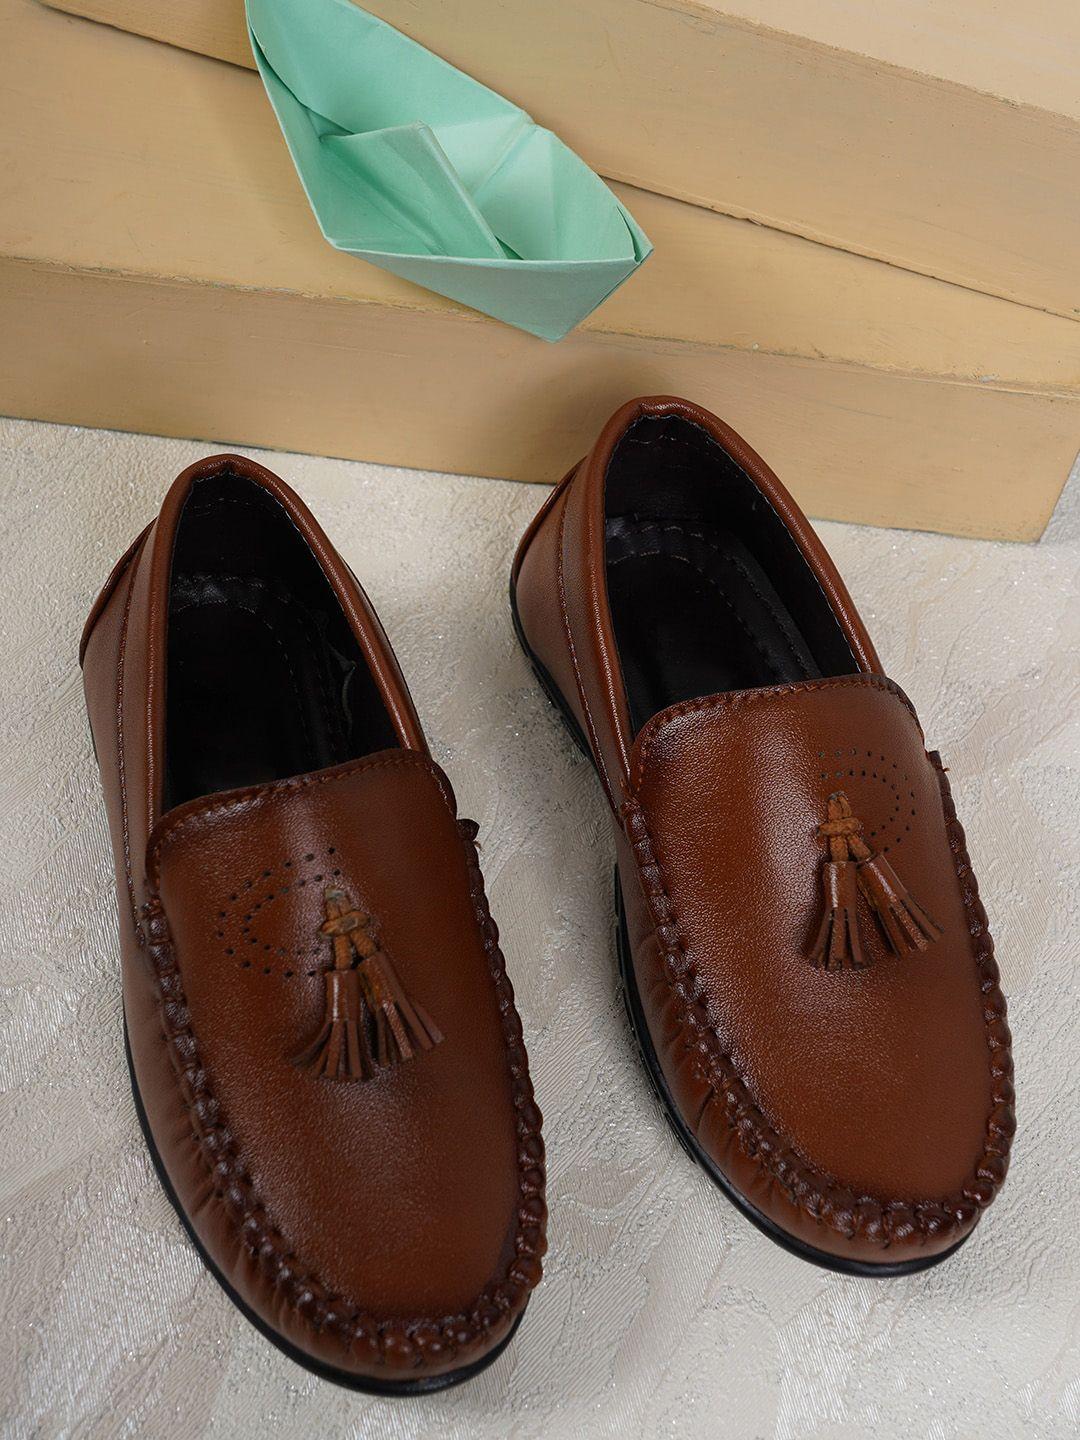 style shoes boys perforated tassel loafers